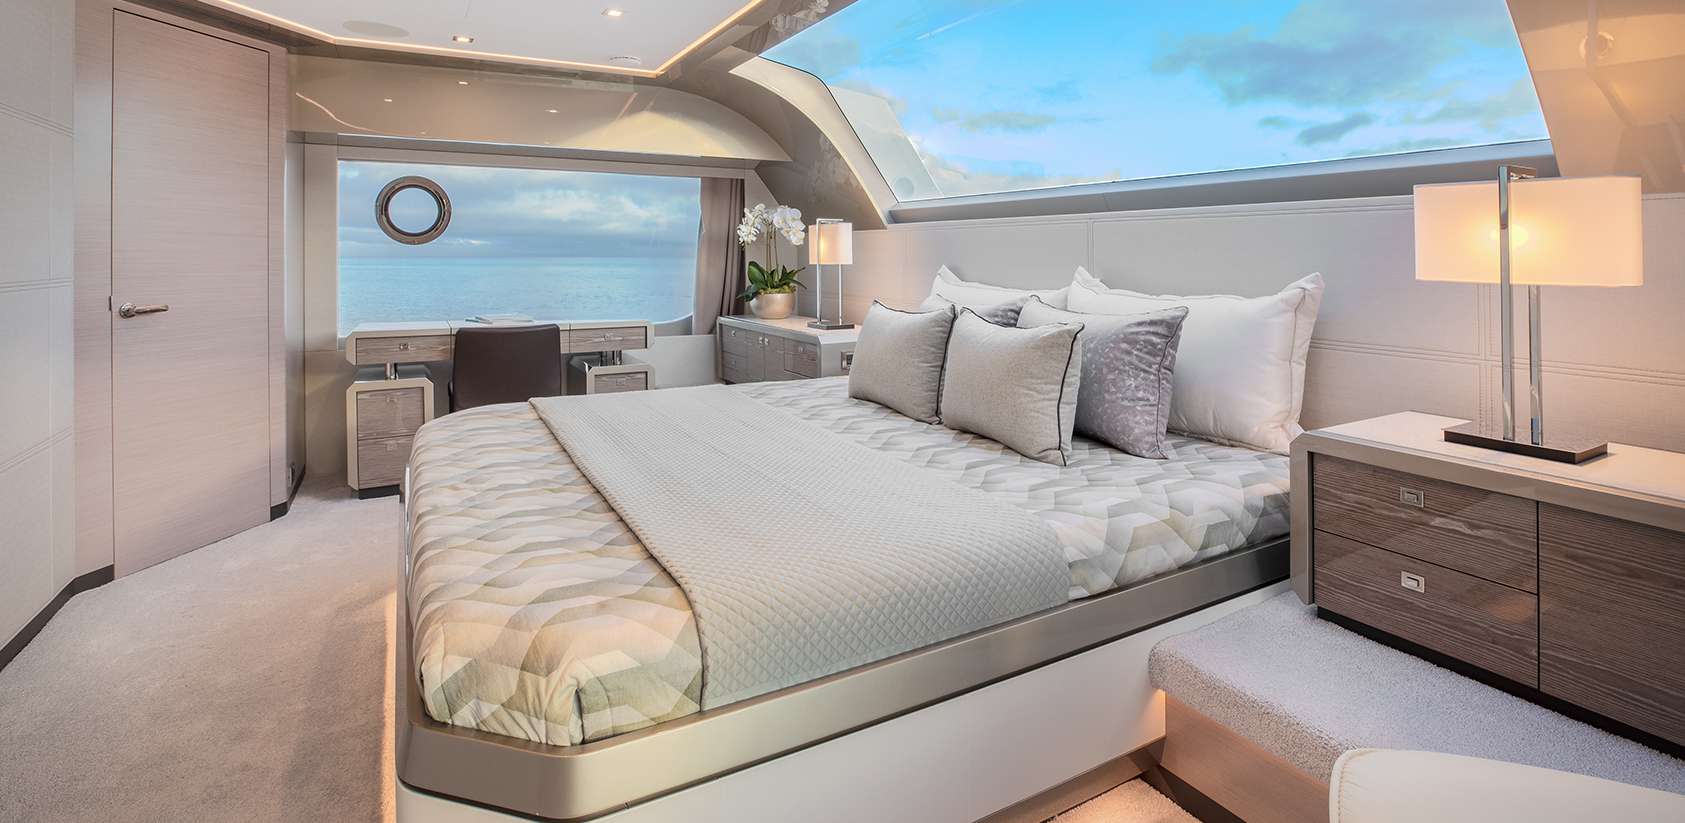 ALMOST DONE - Superyacht charter St Martin & Boat hire in Caribbean, Bahamas, Florida East Coast, Cuba, Dominican Republic, Turks and Caicos, USA South East 6